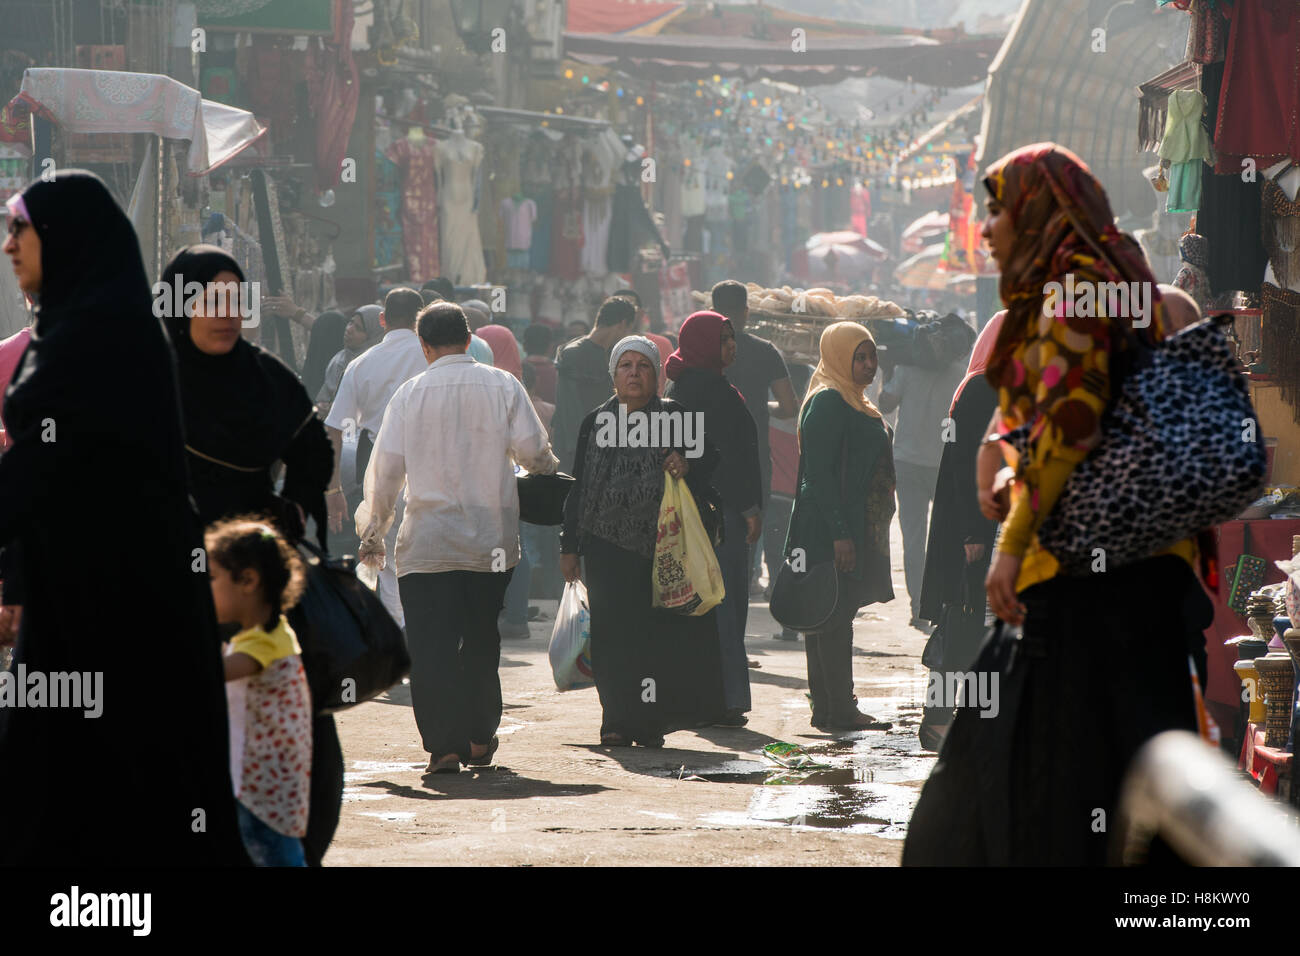 Cairo, Egypt. Egyptian men and covered women in headscarves walking through shops and speaking to shop owners along an alleyway Stock Photo